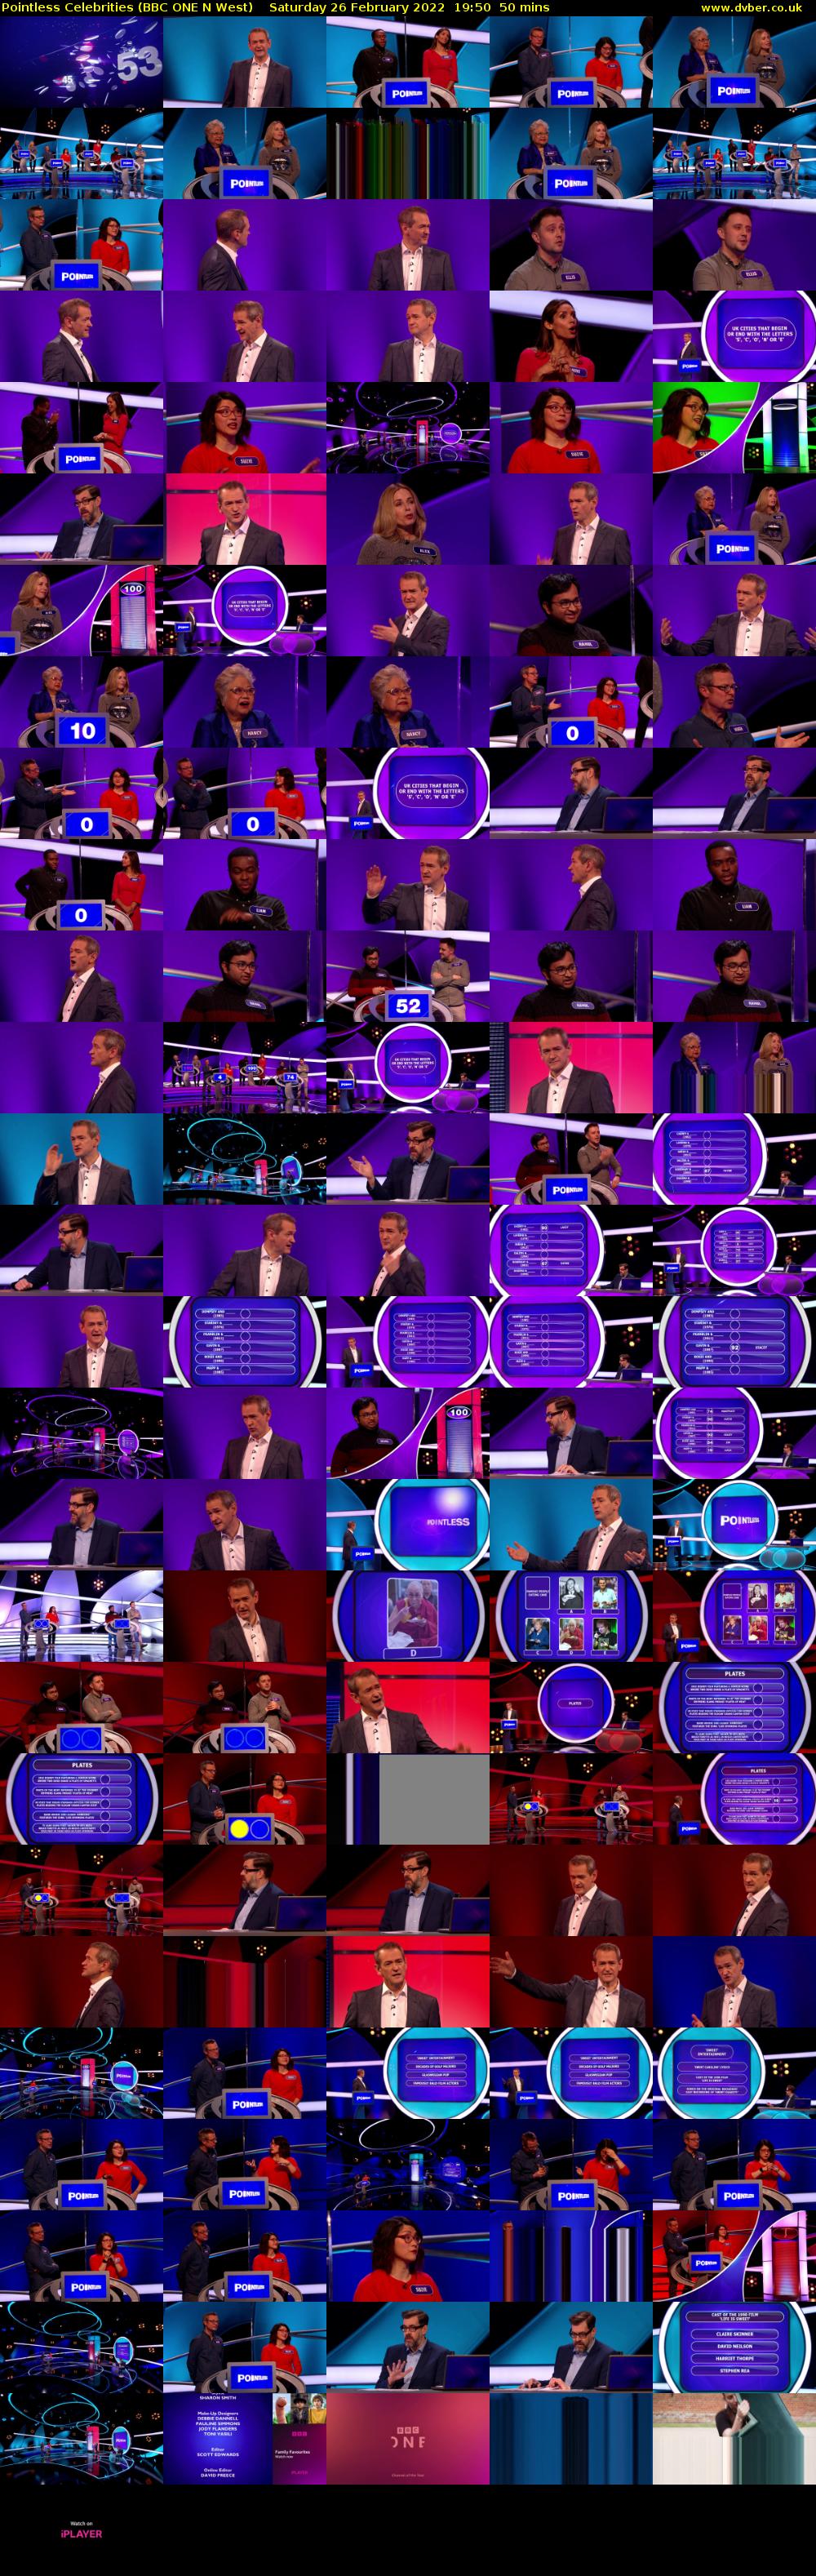 Pointless Celebrities (BBC ONE N West) Saturday 26 February 2022 19:50 - 20:40